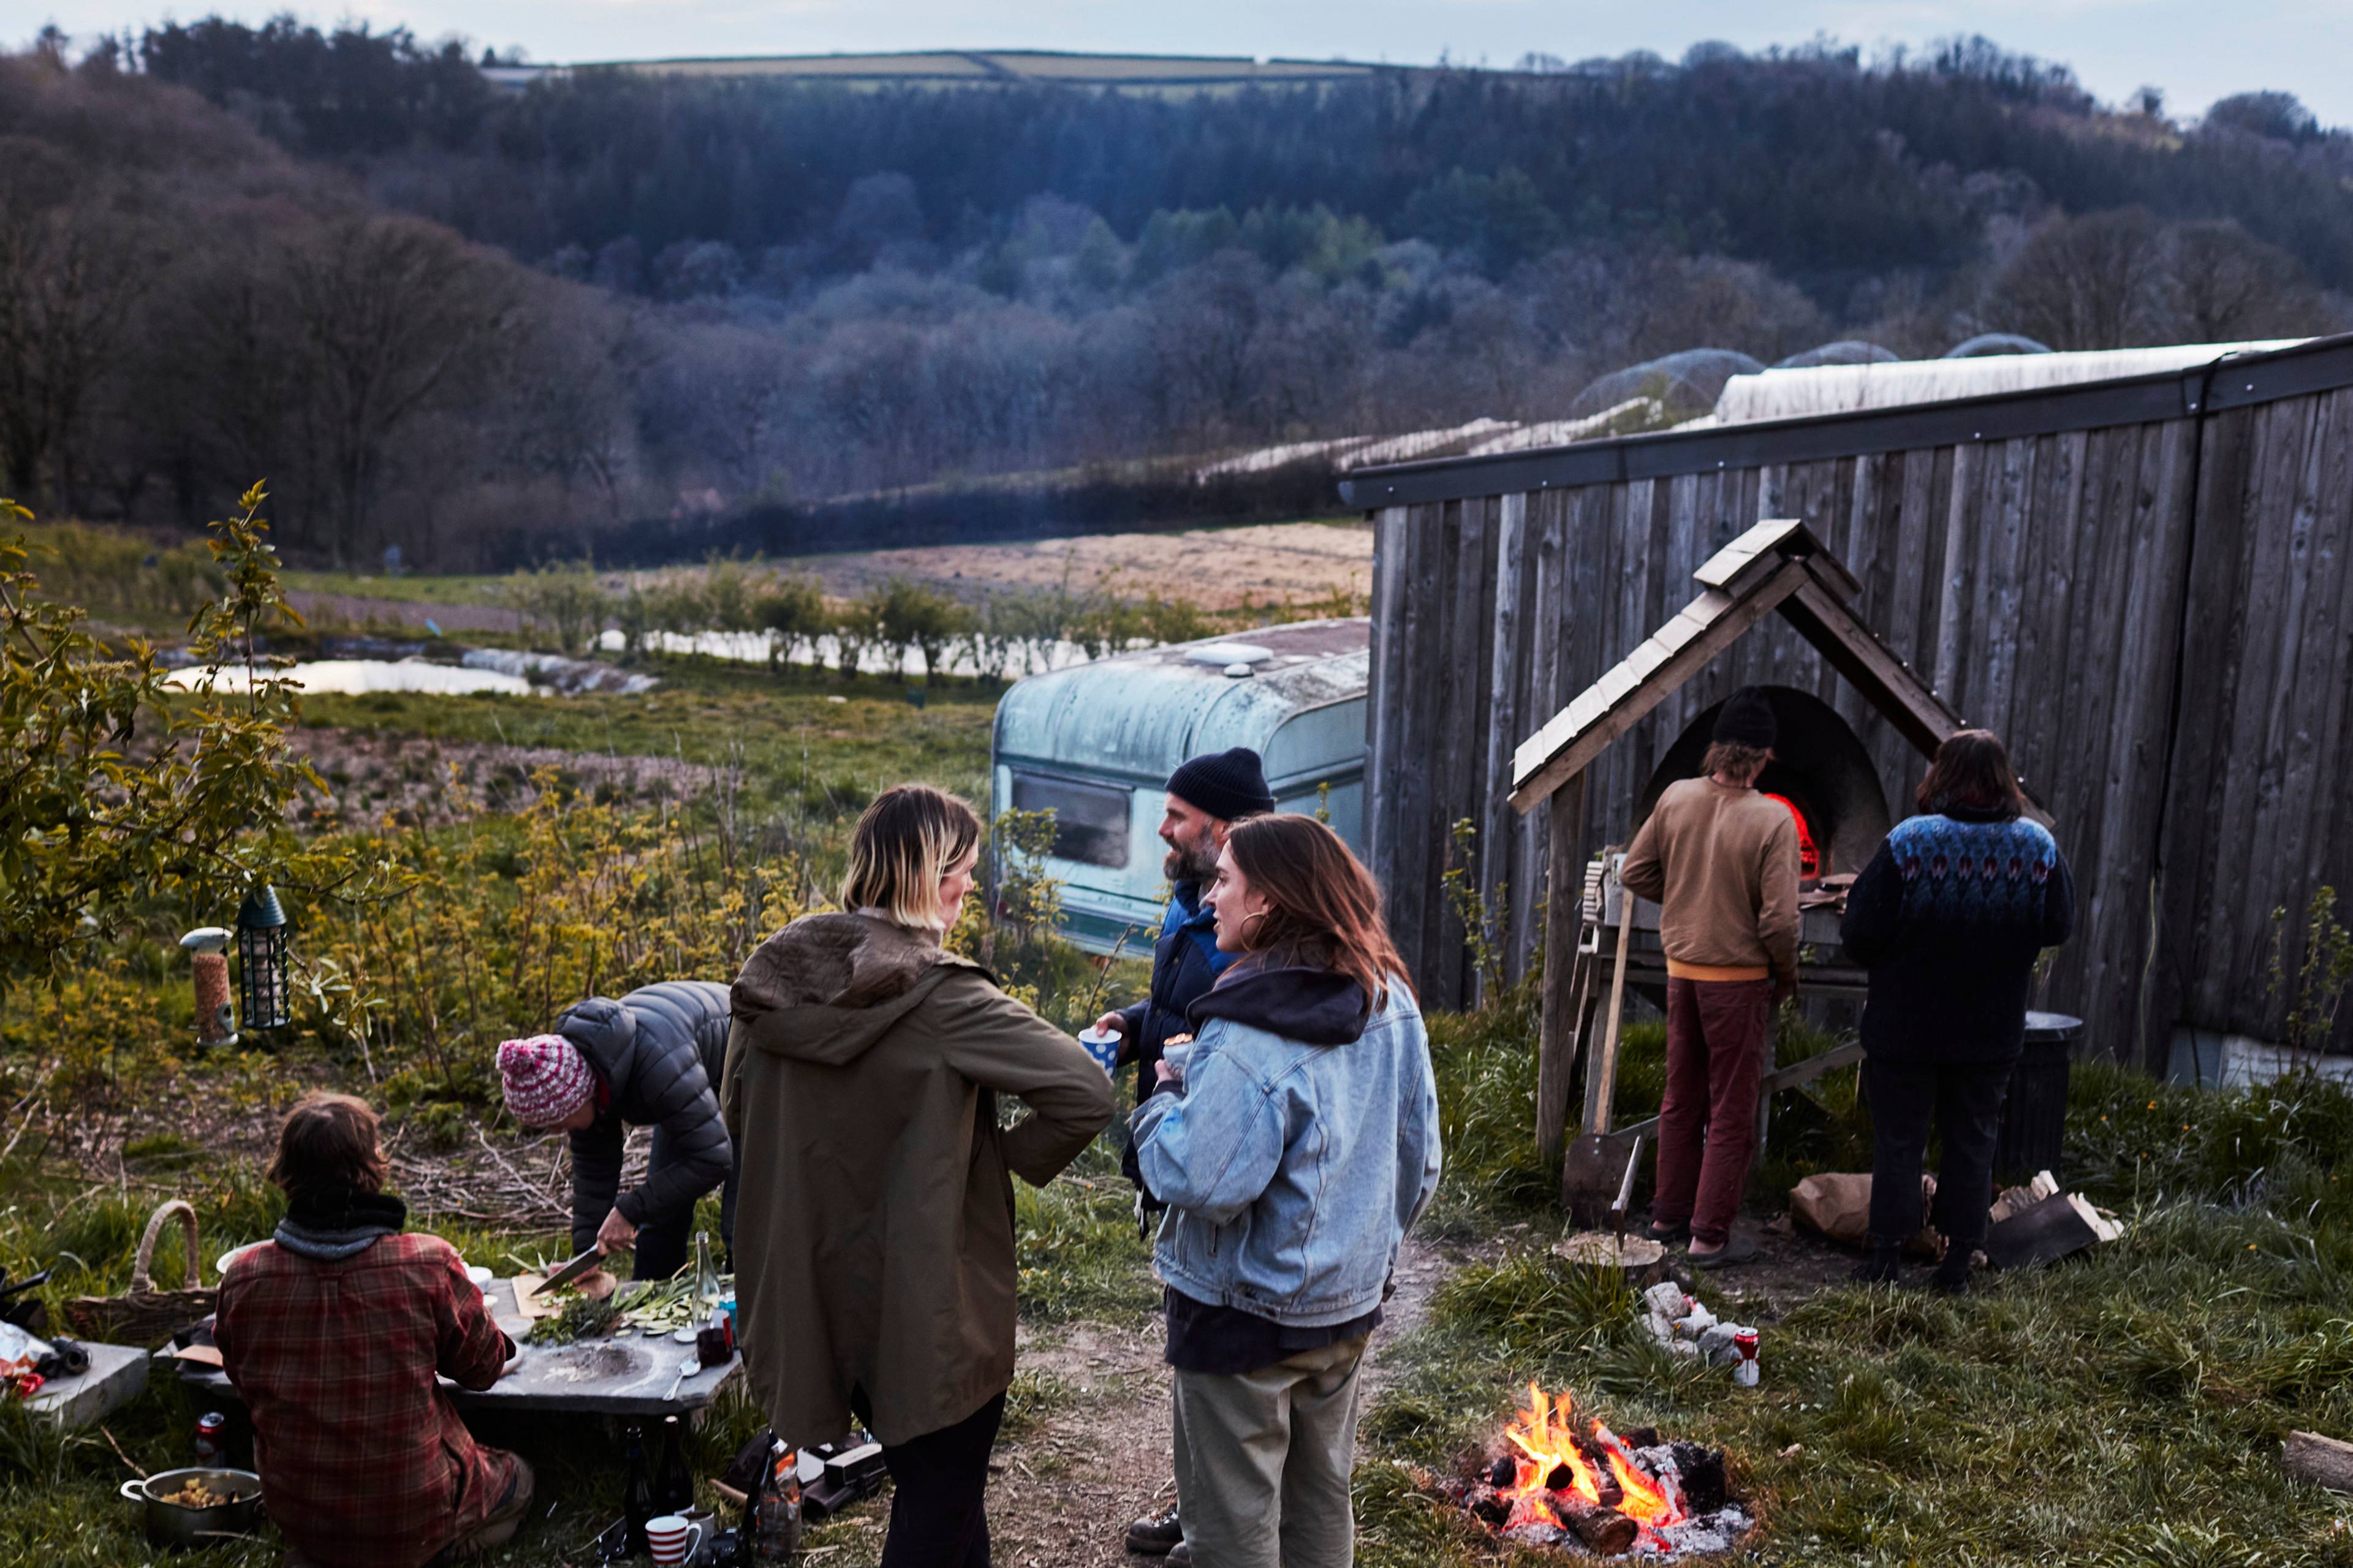 Group of people cooking and talking around the fire on a farm